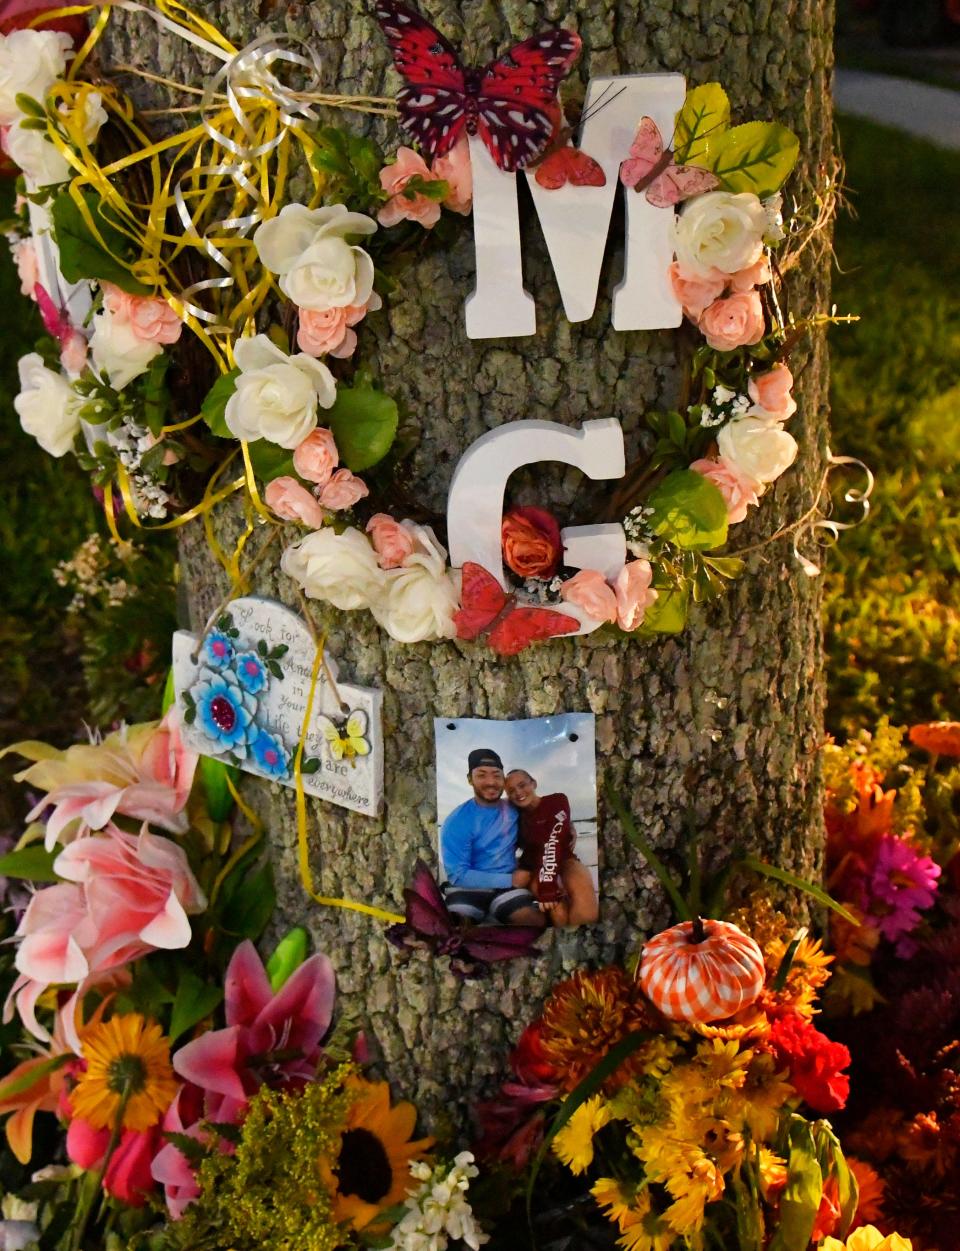 The memorial on Front Street in Melbourne continues to be added to in memory of best friends Megan Grace and Rikki Grace, both killed after being struck by an out-of-control pick up truck.